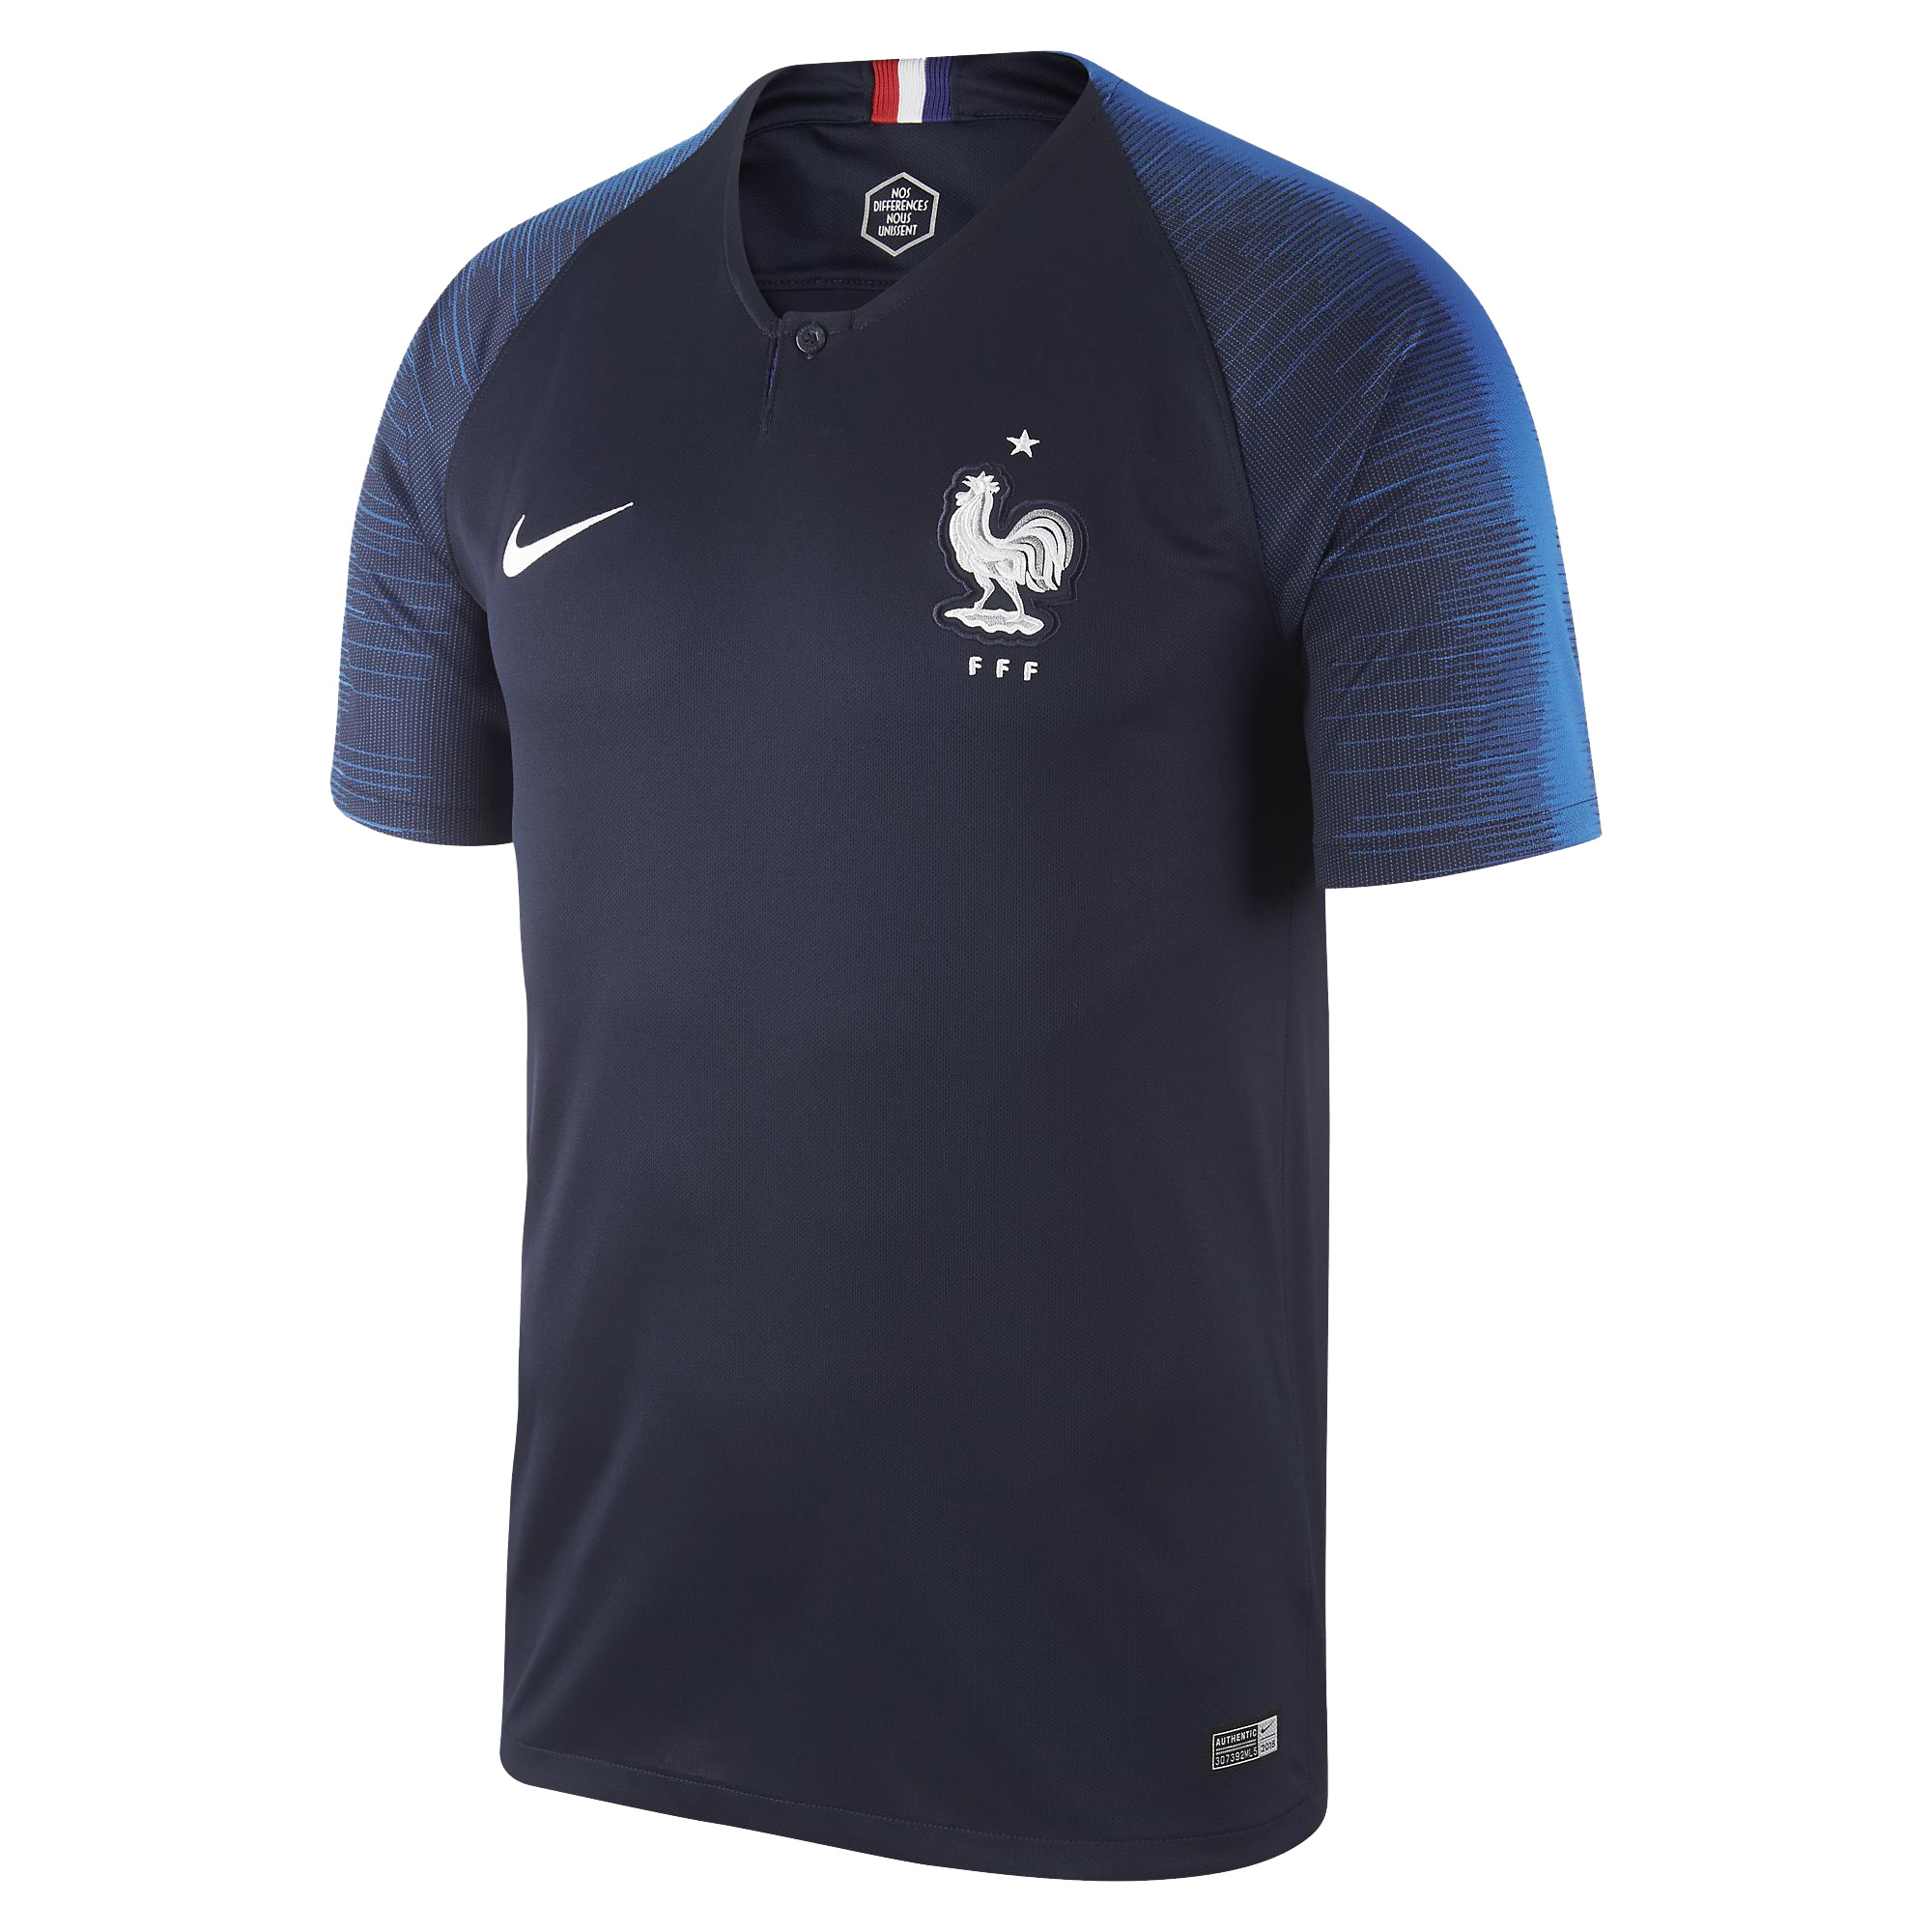 FIFA World Cup 2018 Home Jersey Menonline